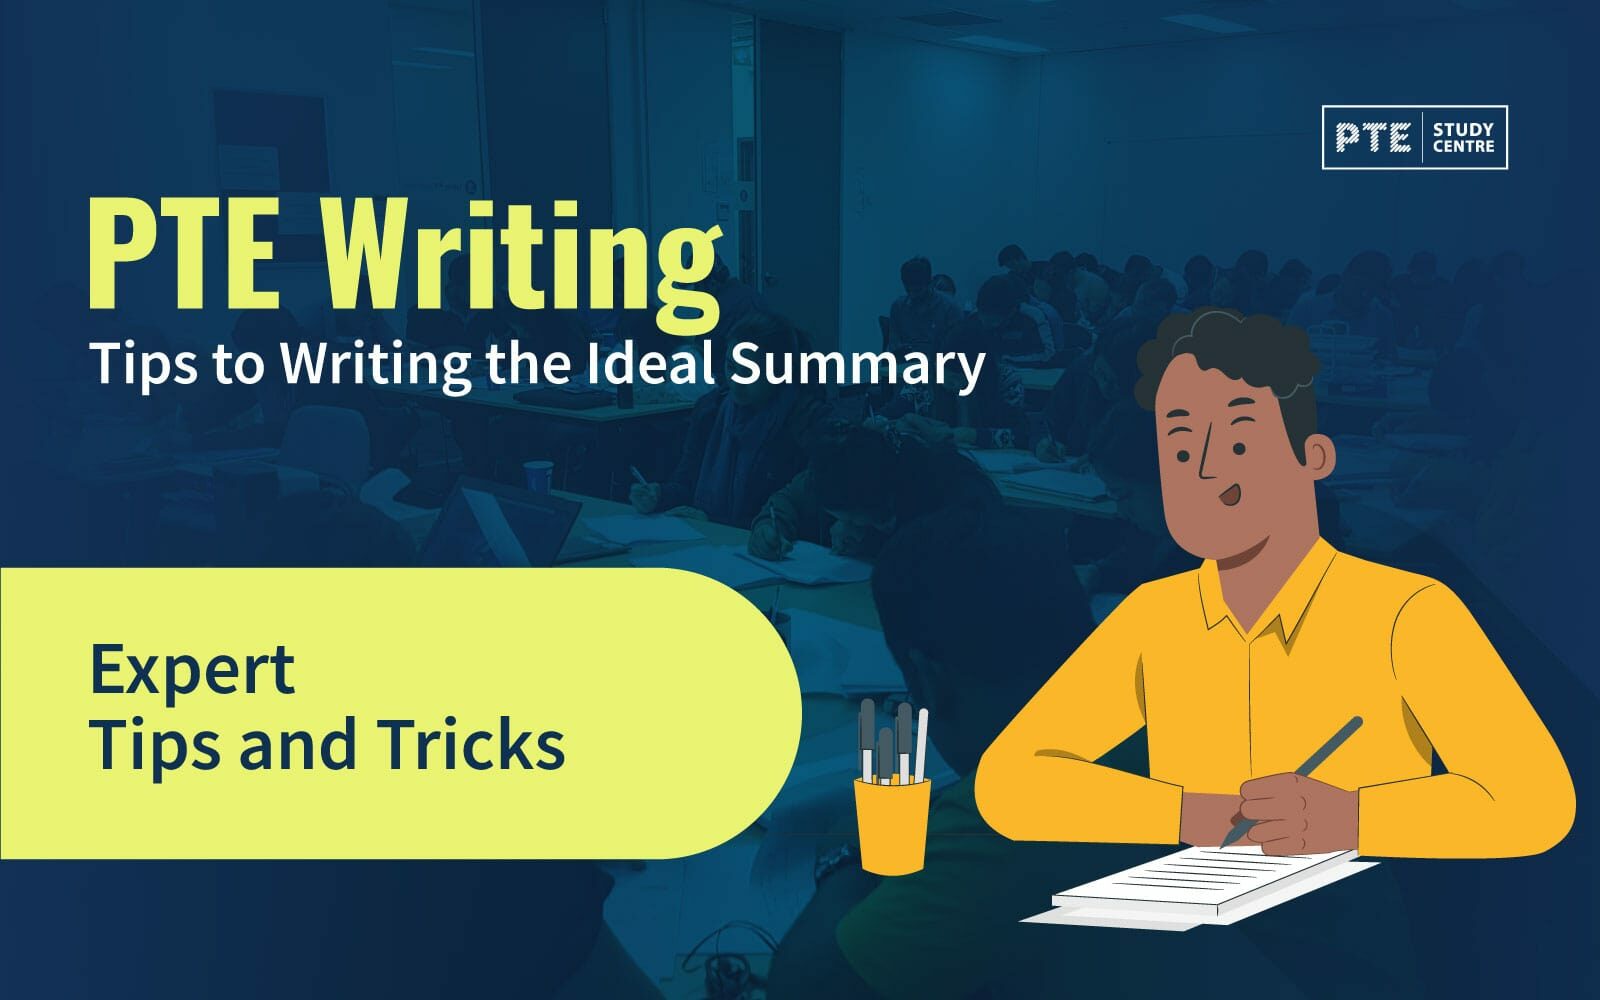 PTE Writing: Tips to Writing the Ideal Summary image